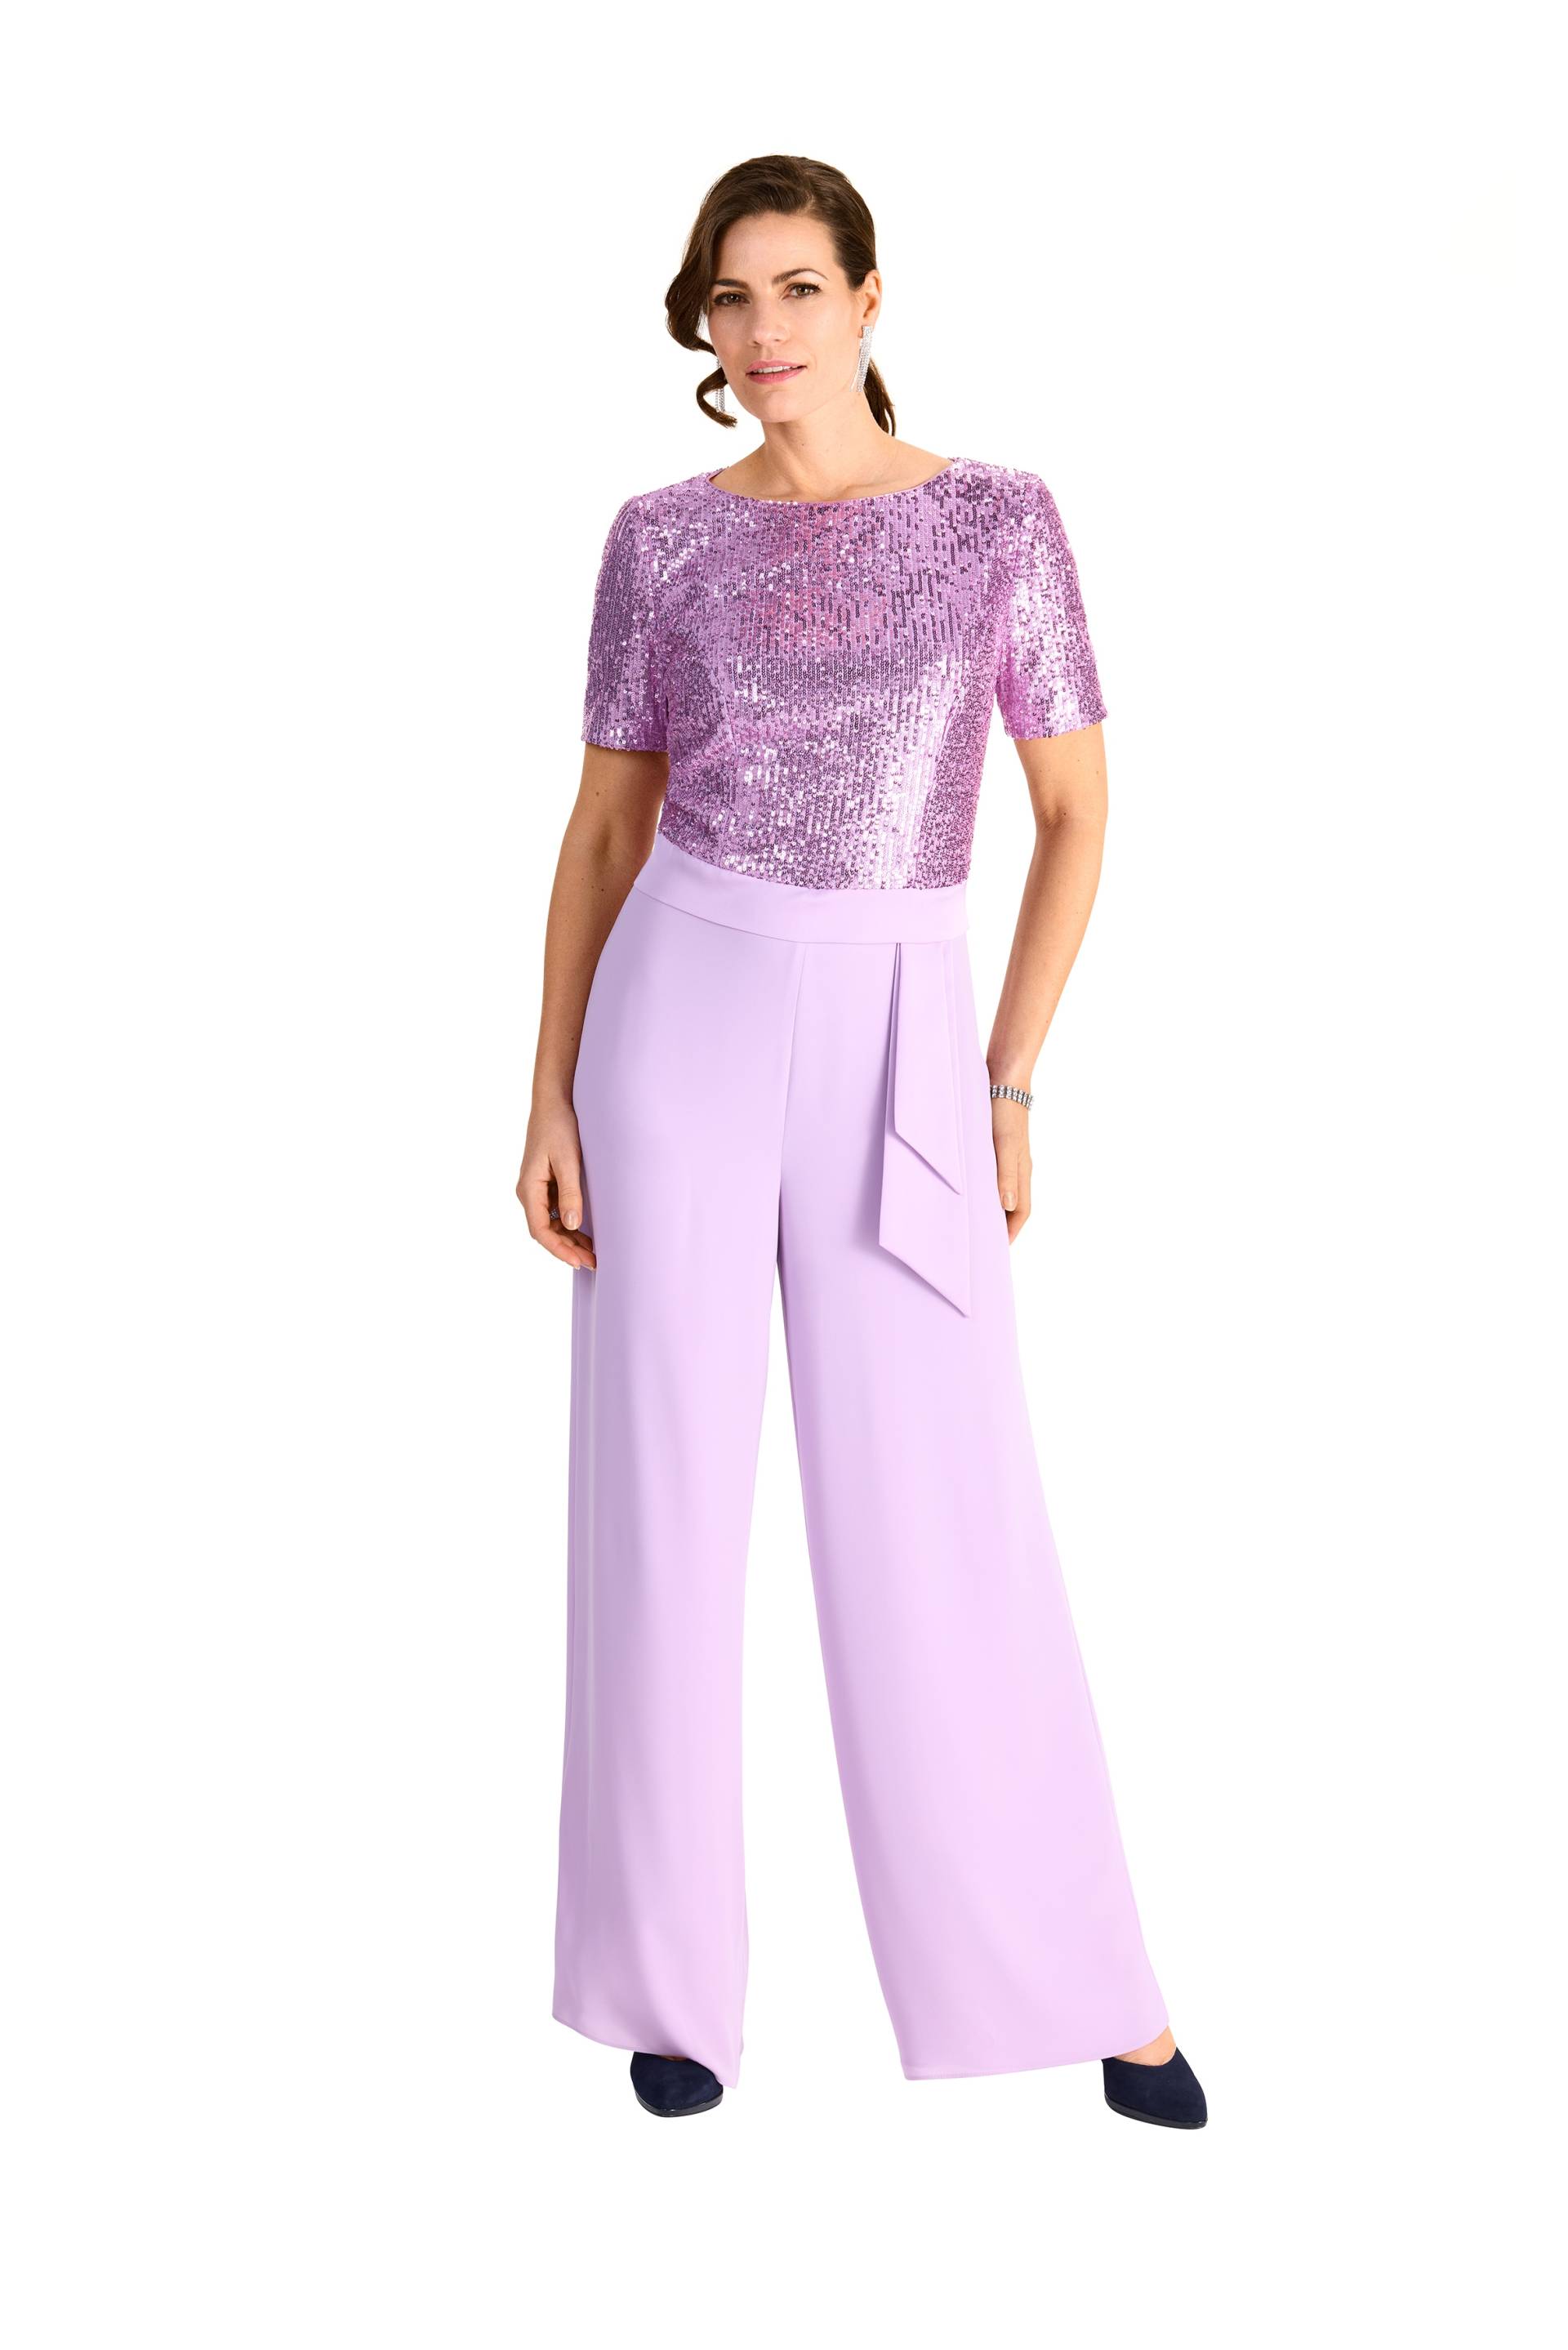 HERMANN LANGE Collection Culotte-Overall, mit Pailletten von HERMANN LANGE Collection